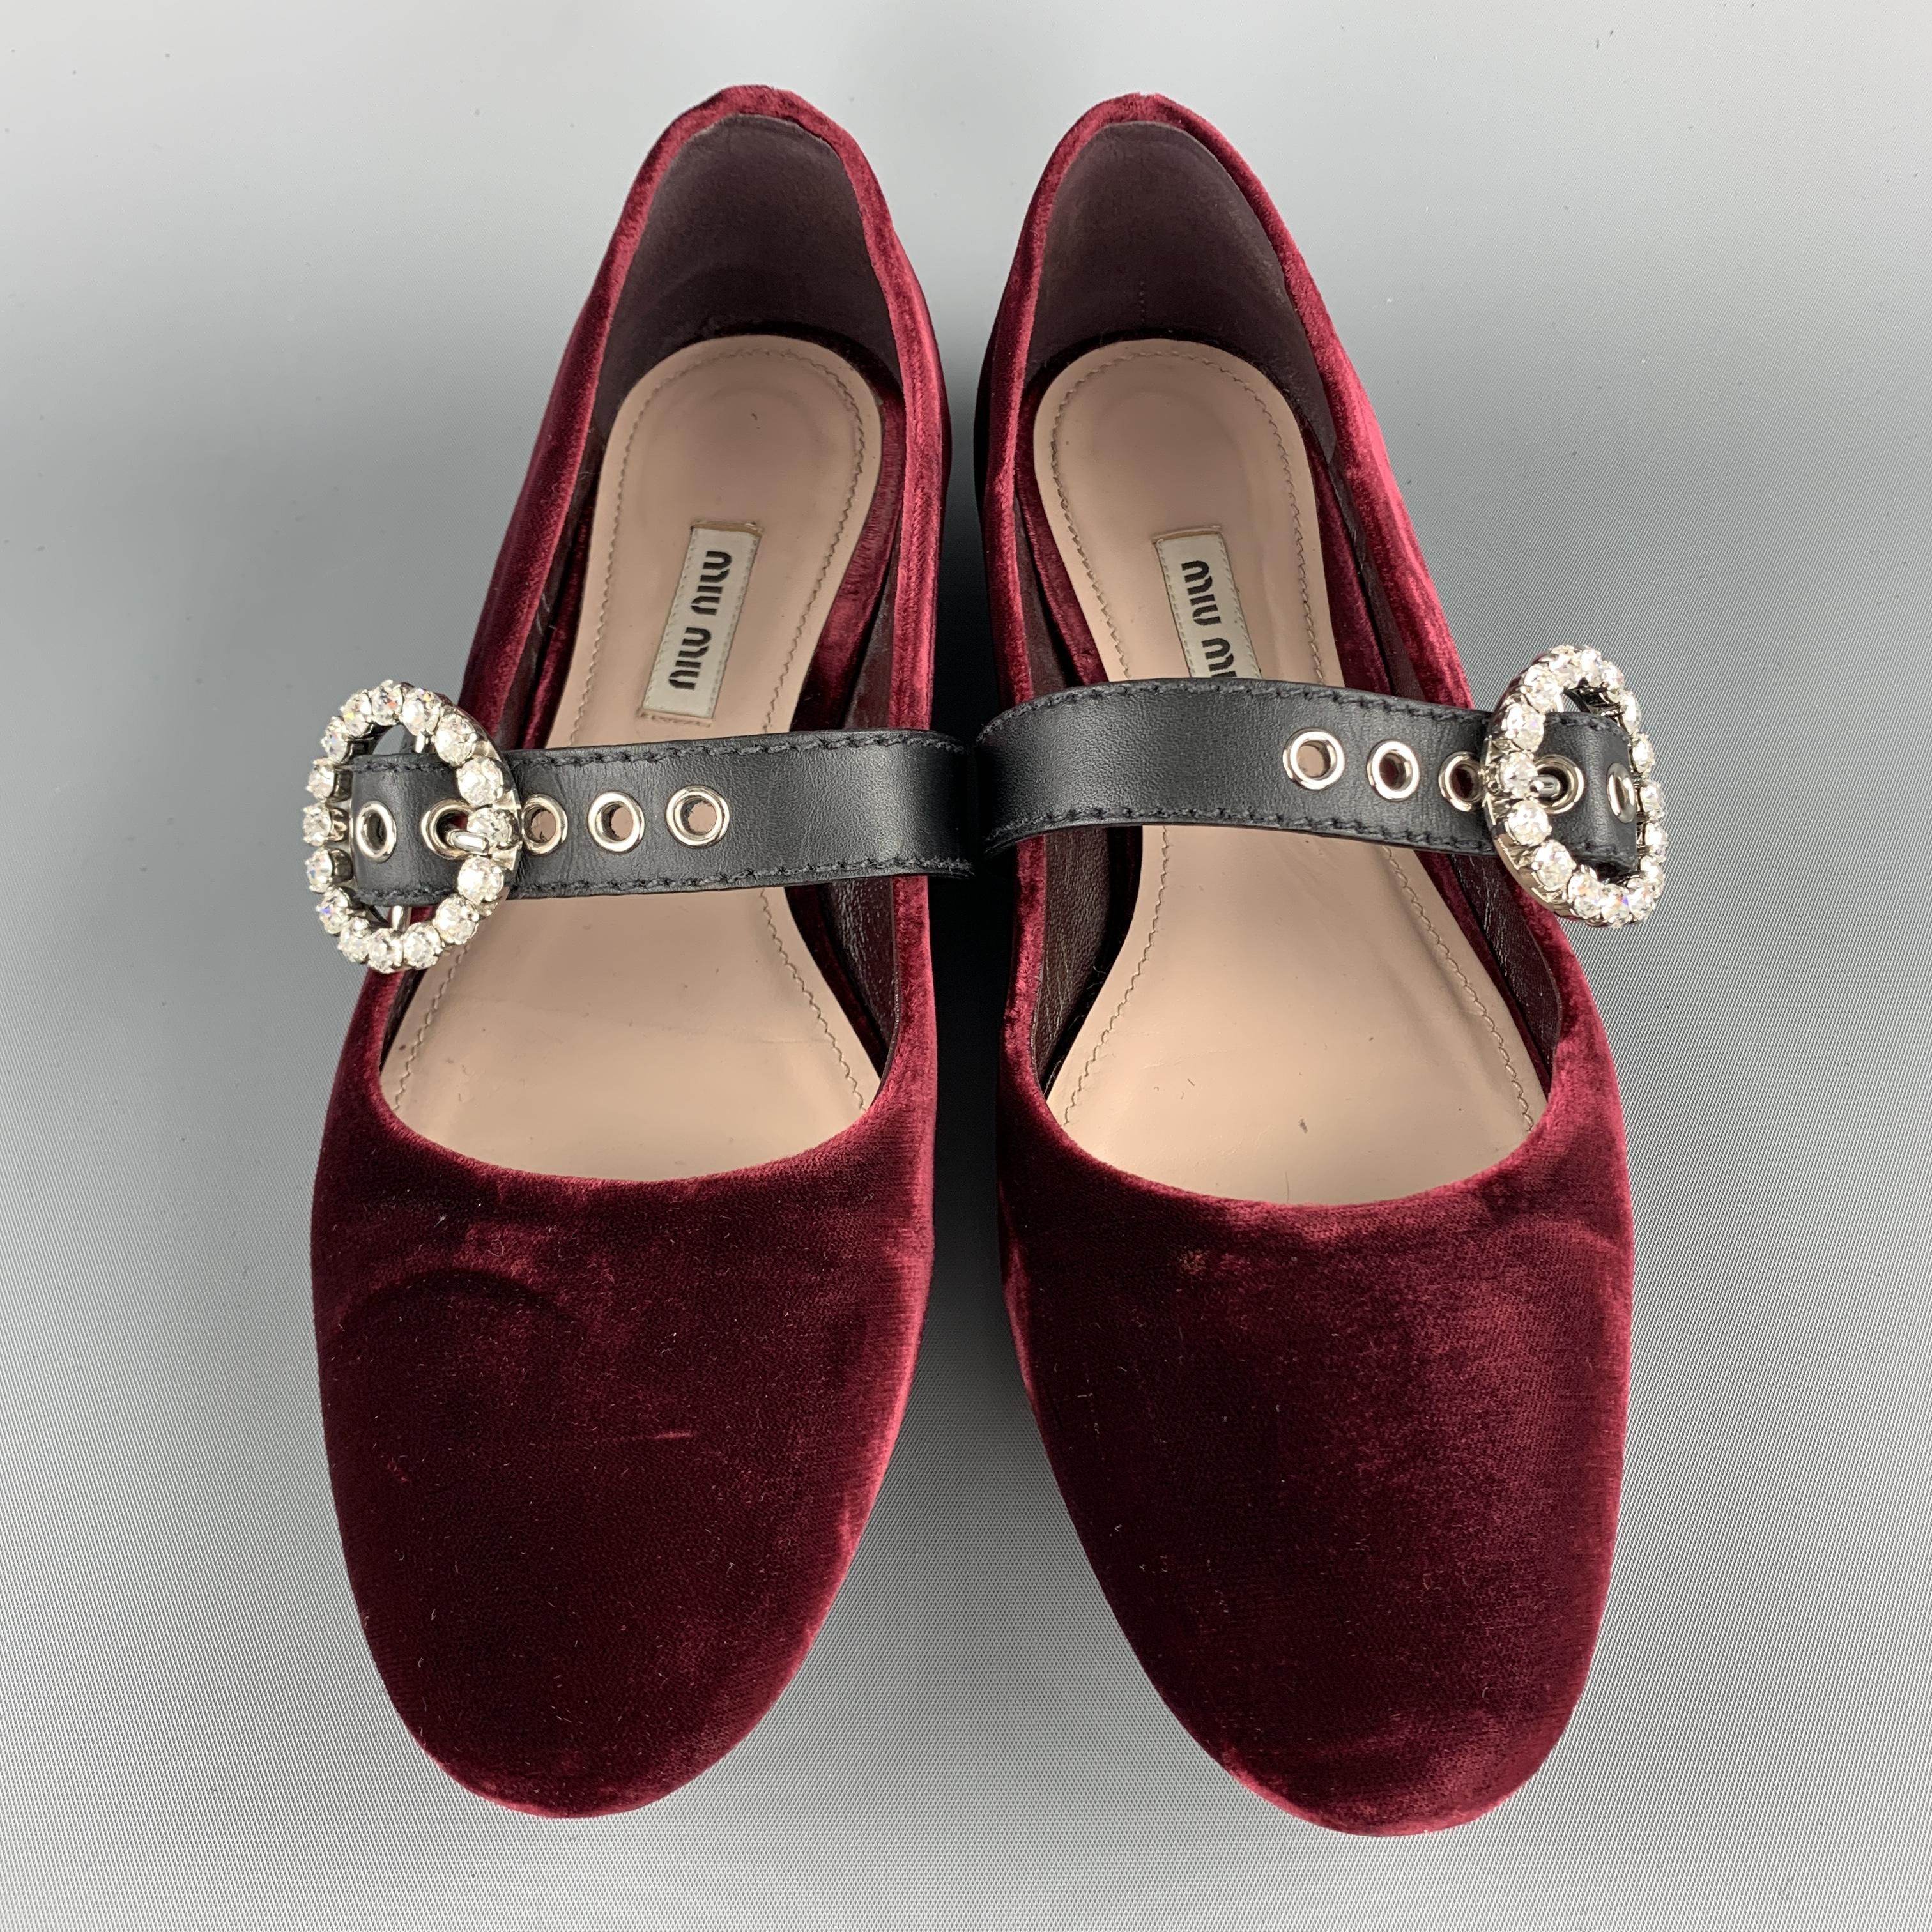 MIU MIU flats come in burgundy velvet with a leather Mary Jane strap accented with a round rhinestone studded buckle. Made in Italy.

Very Good  Pre-Owned Condition.
Marked: IT 39

Outsole: 10.5 x 3.5 in.